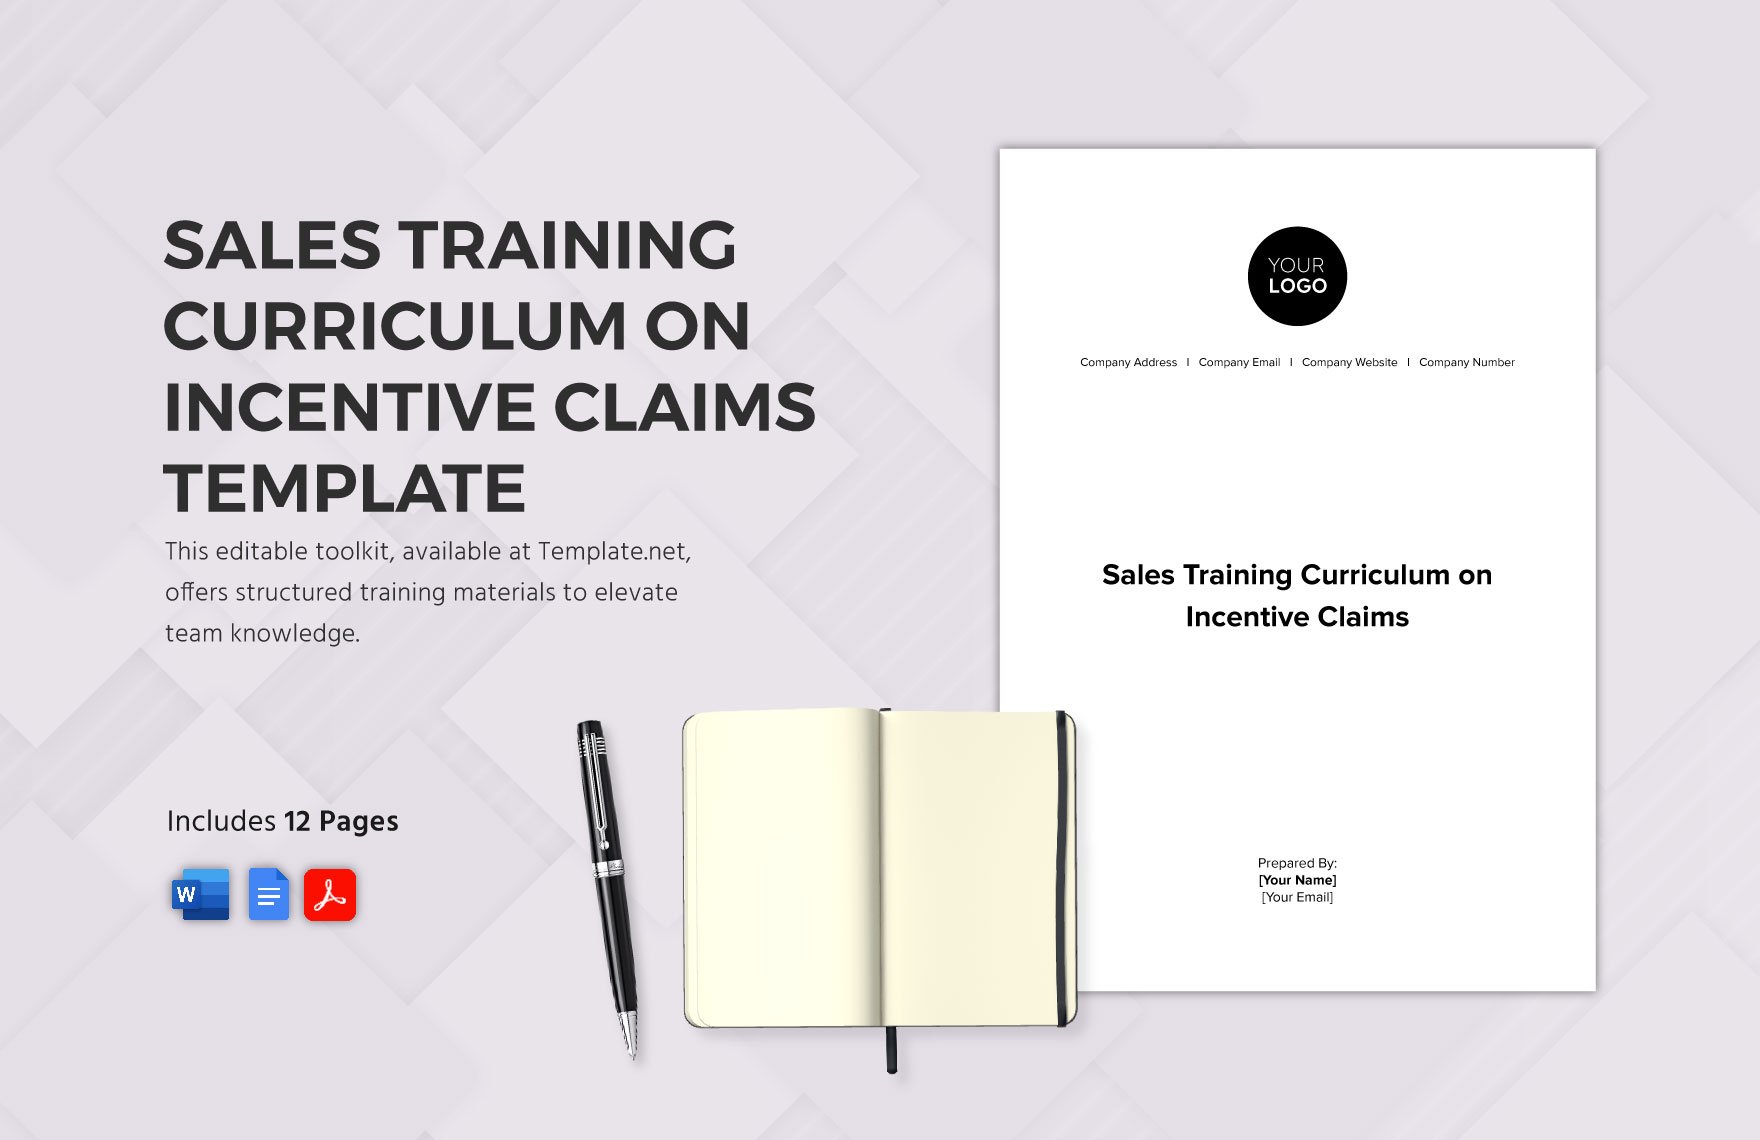 Sales Training Curriculum on Incentive Claims Template